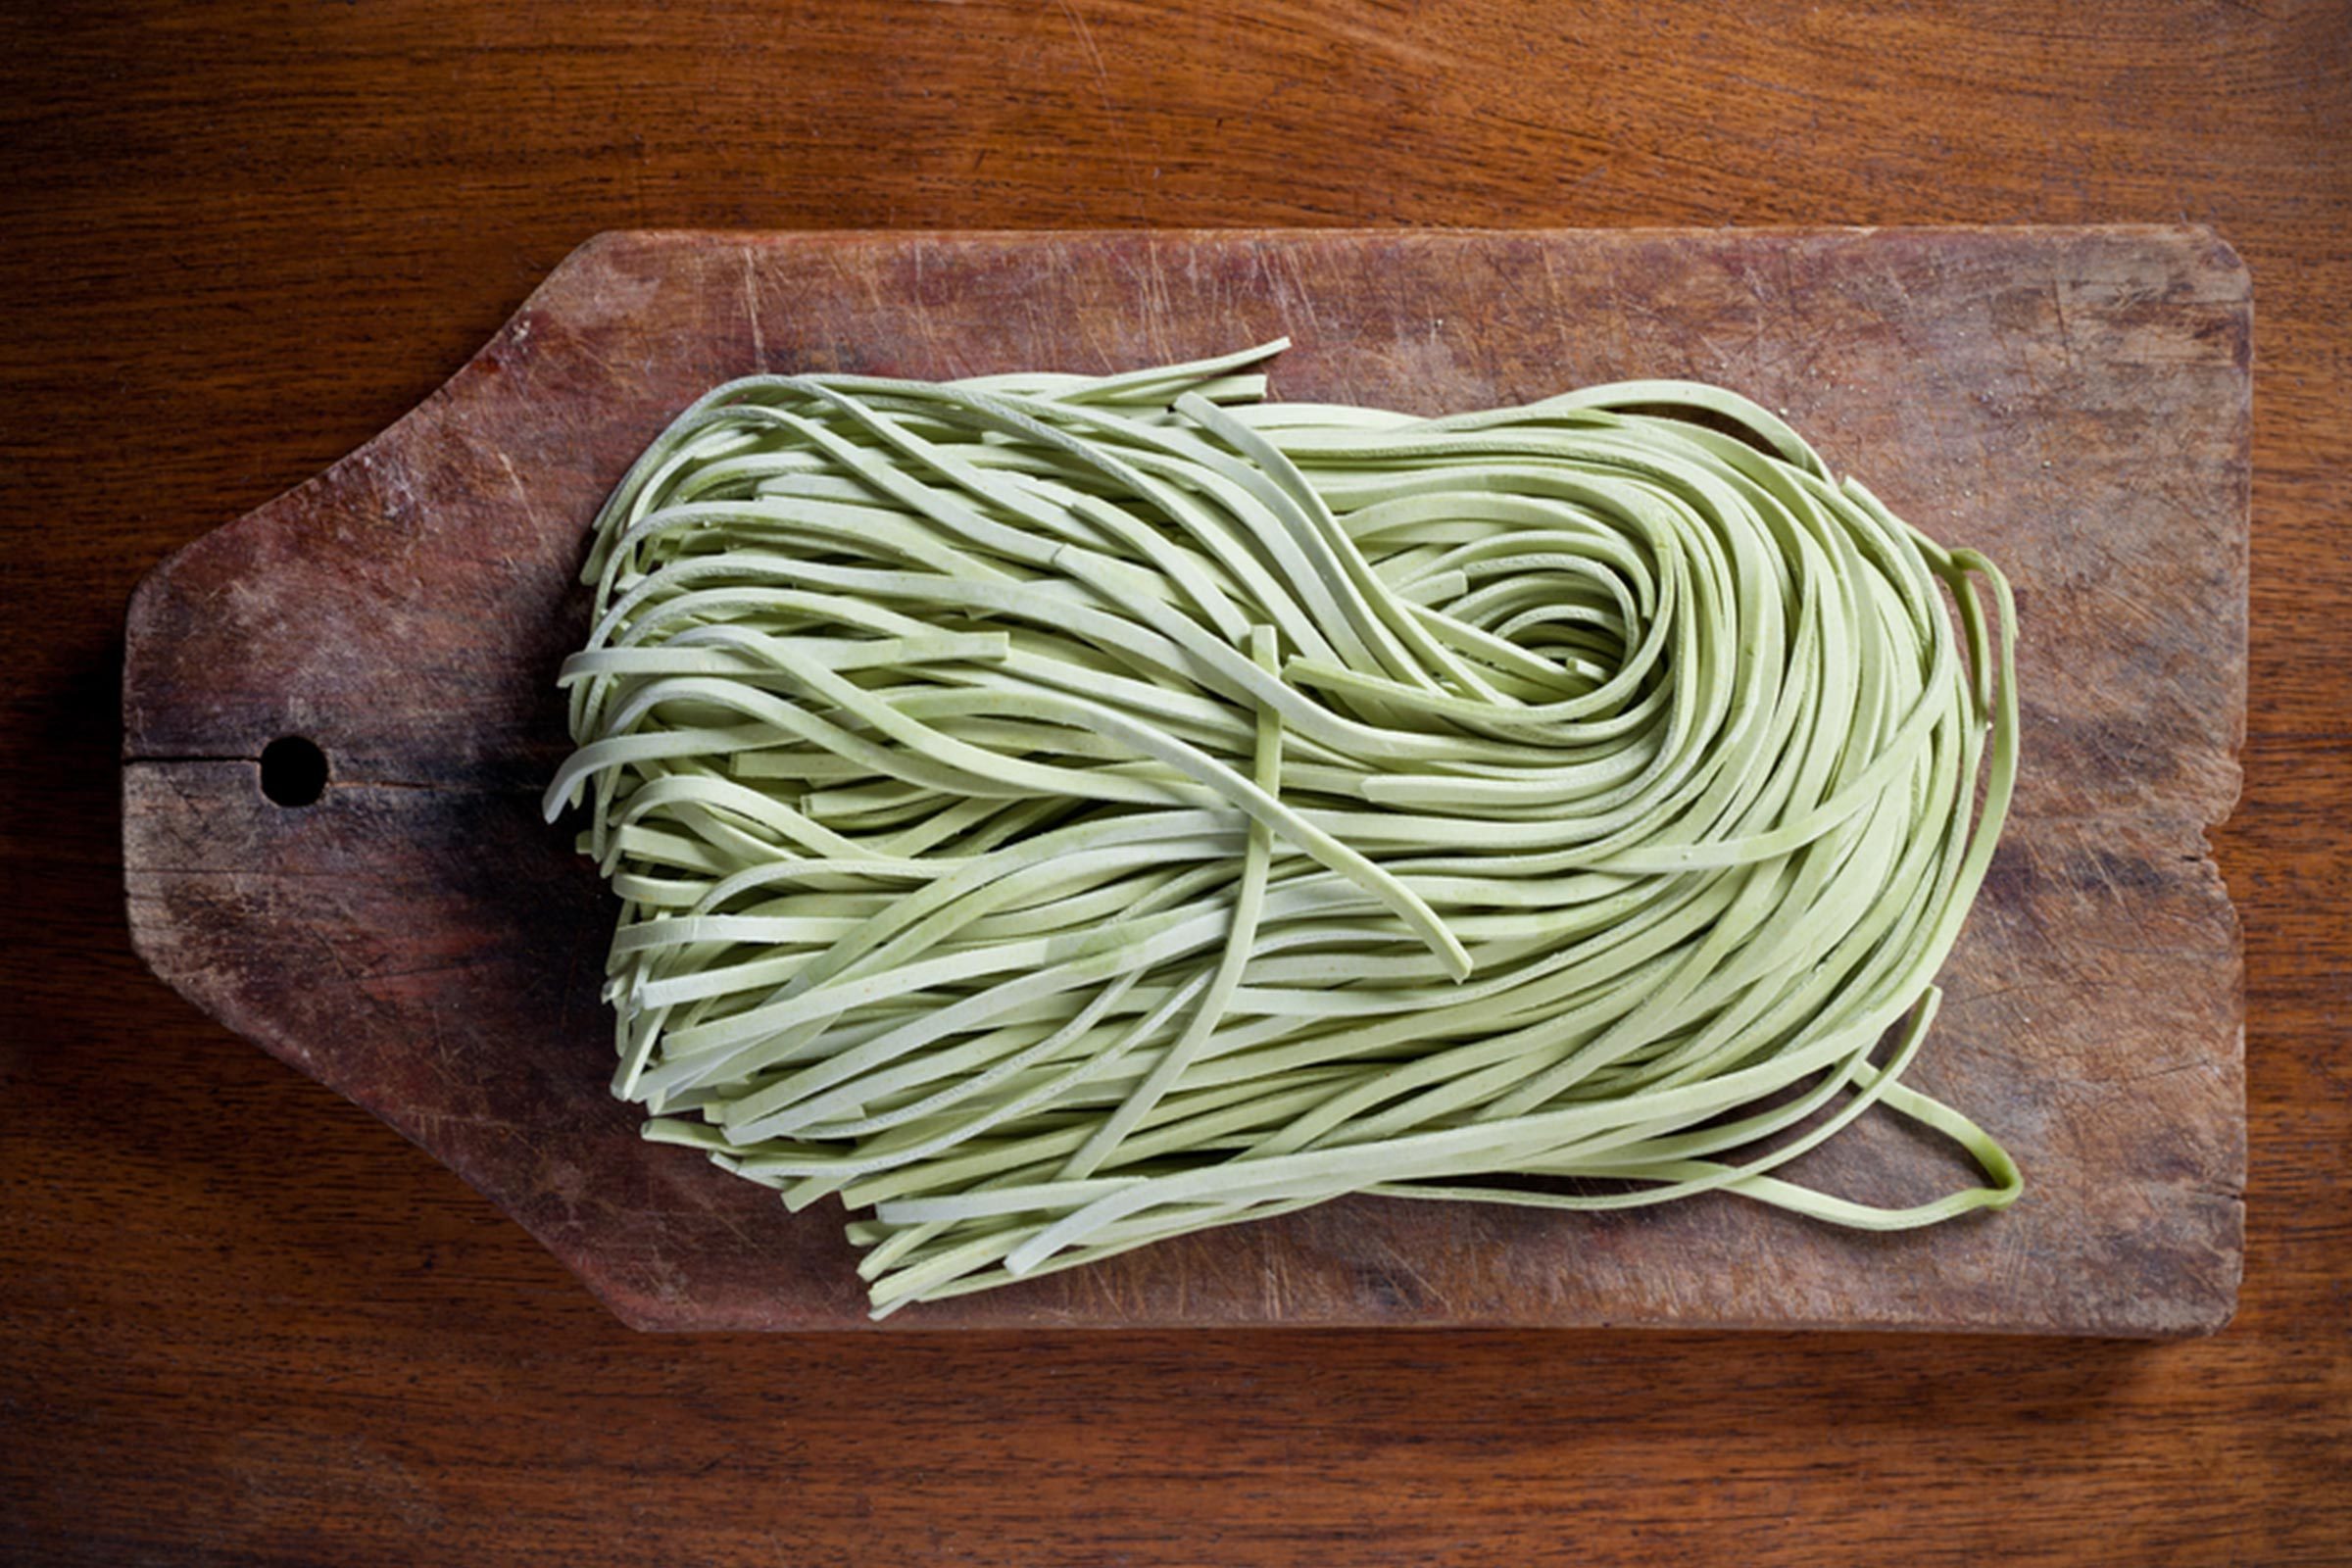 Is Pasta Healthy? Here's What a Nutritionist Thinks